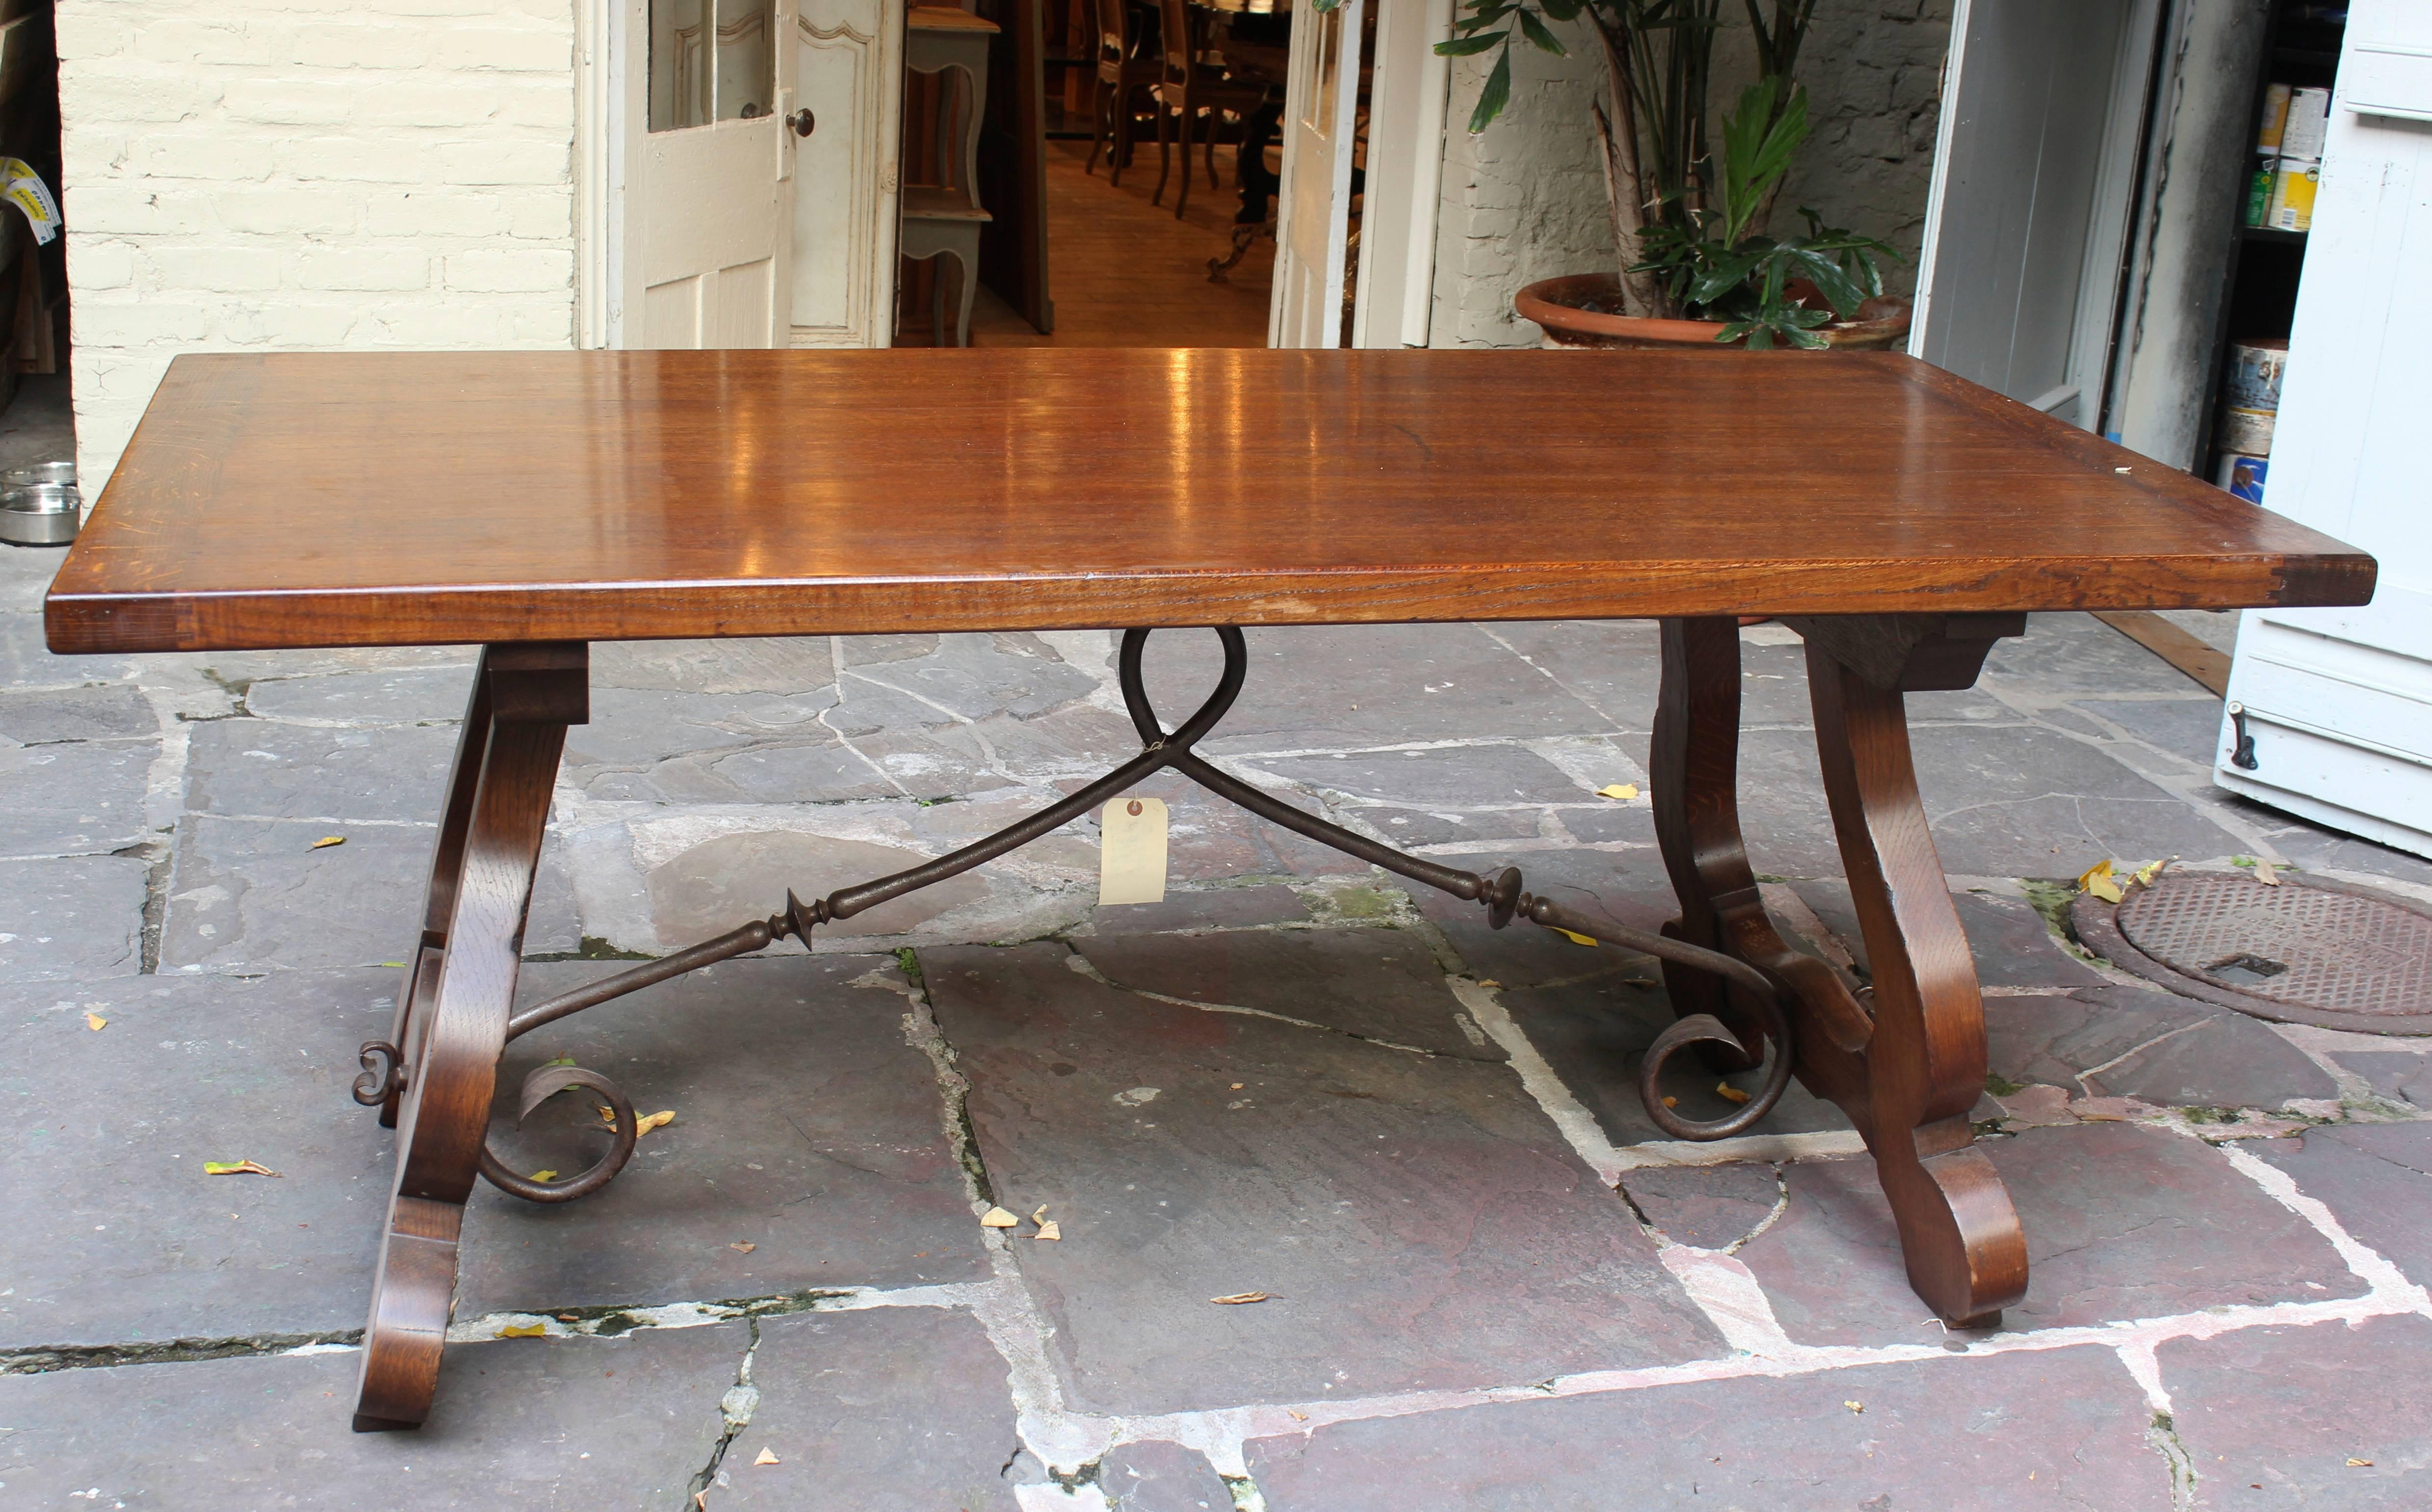 19th Century Antique French Gentlemen's Table from San Tropez with Original Ironwork